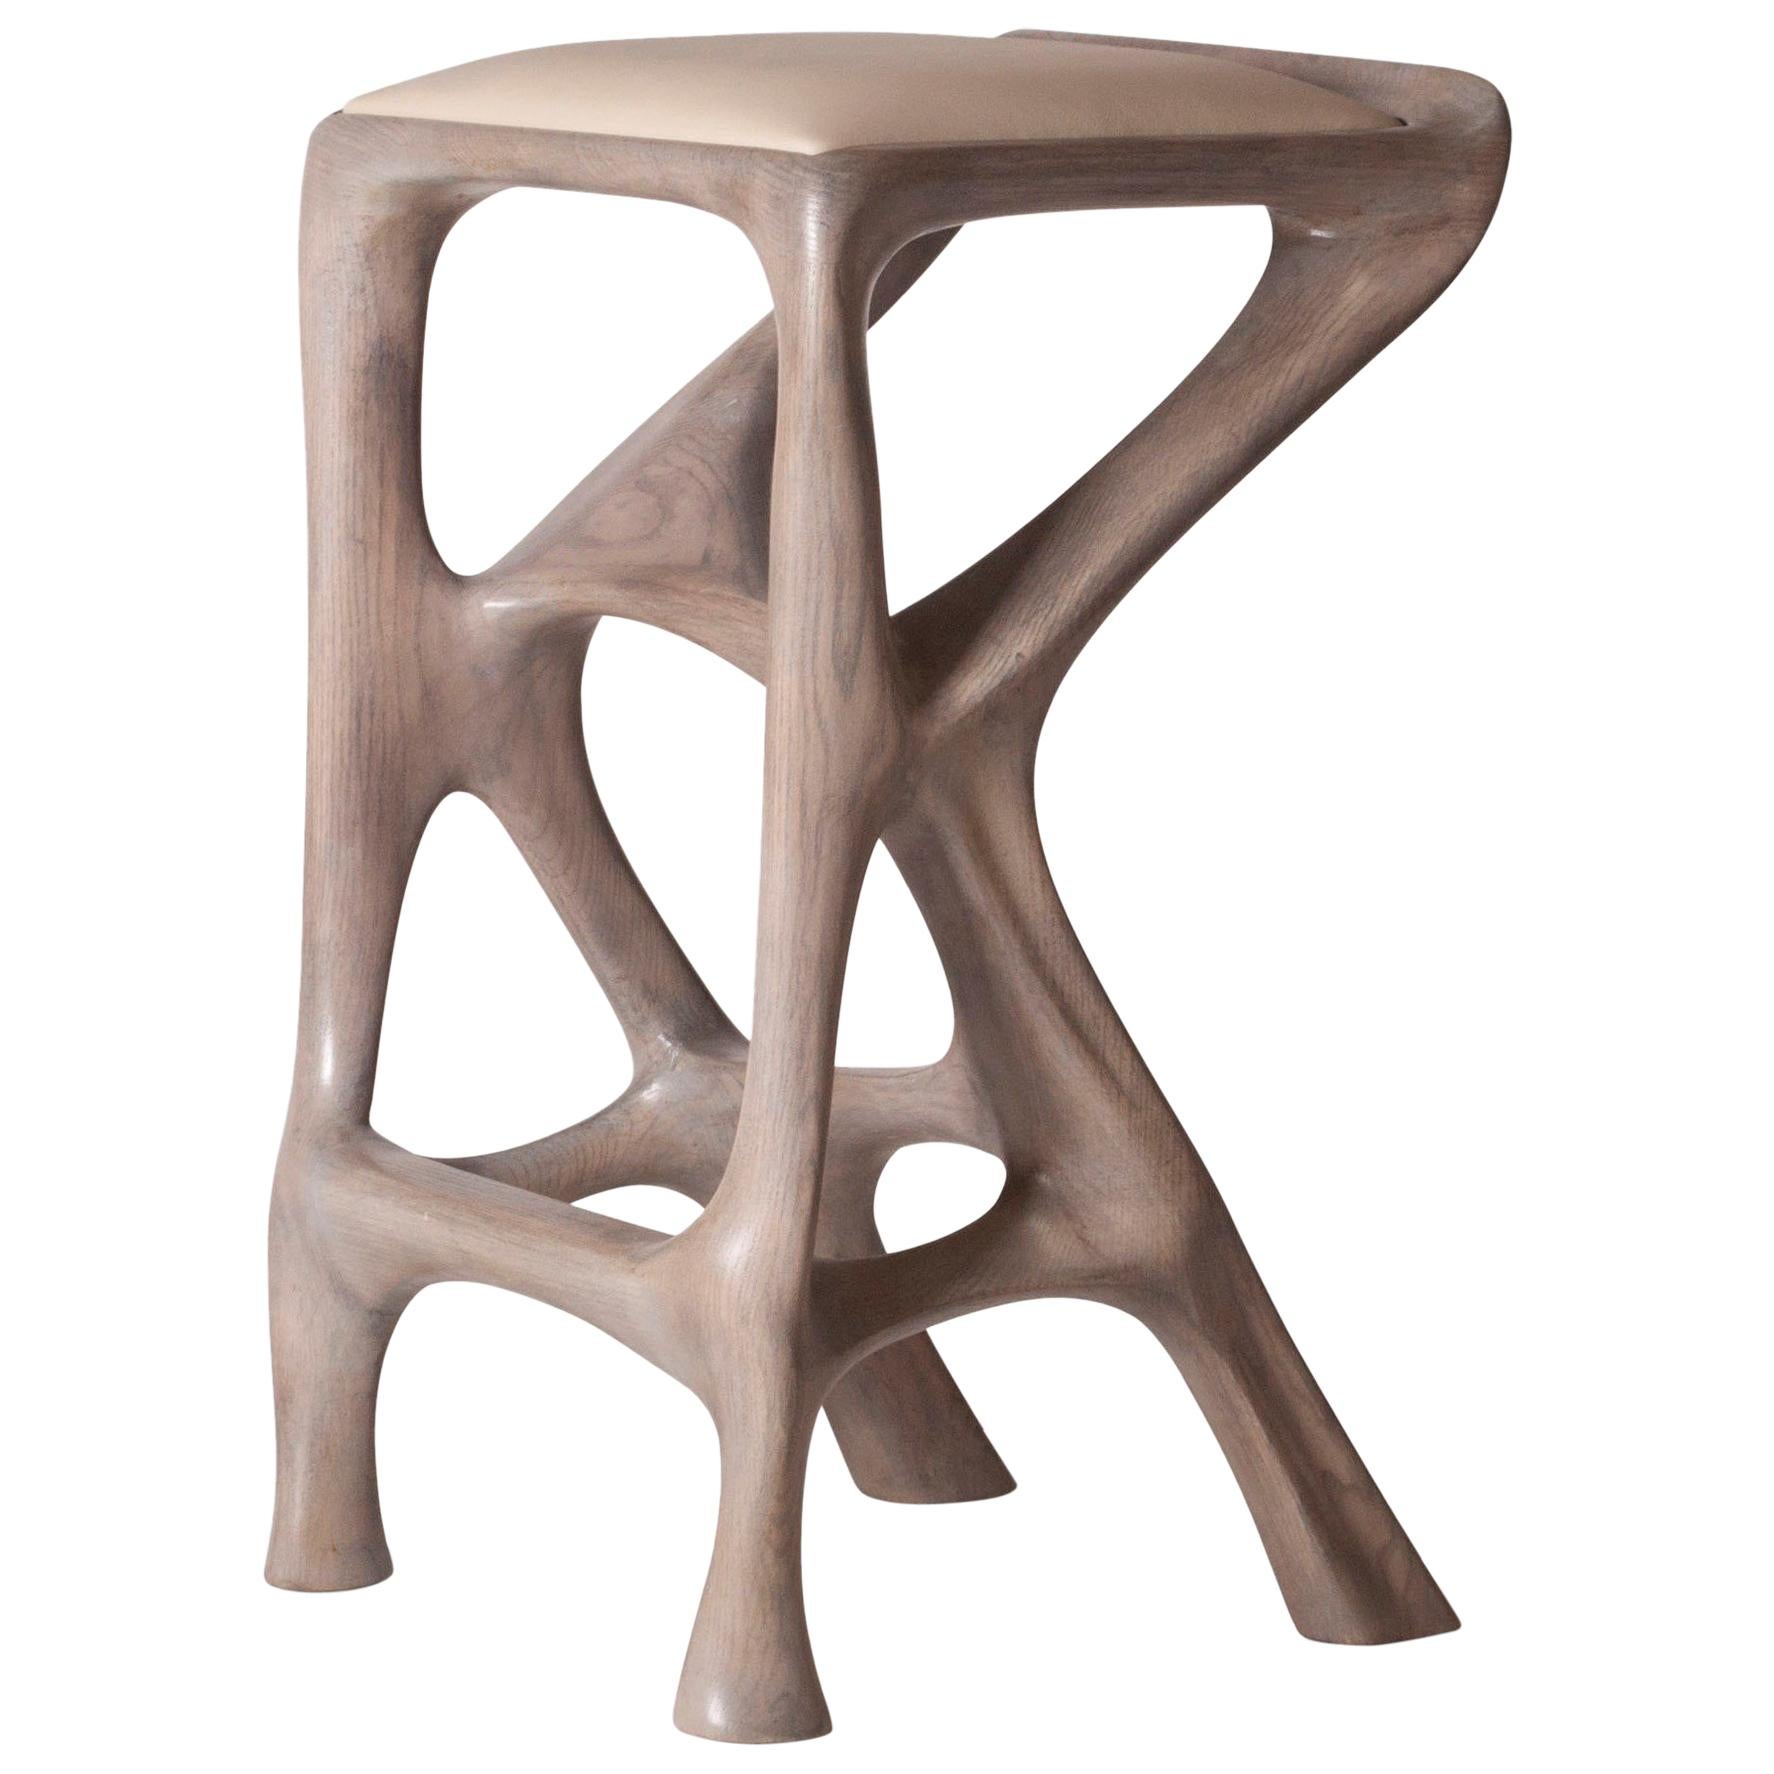 Amorph Chimera Bar Stool in Gray Oak stain on Ash wood counter height